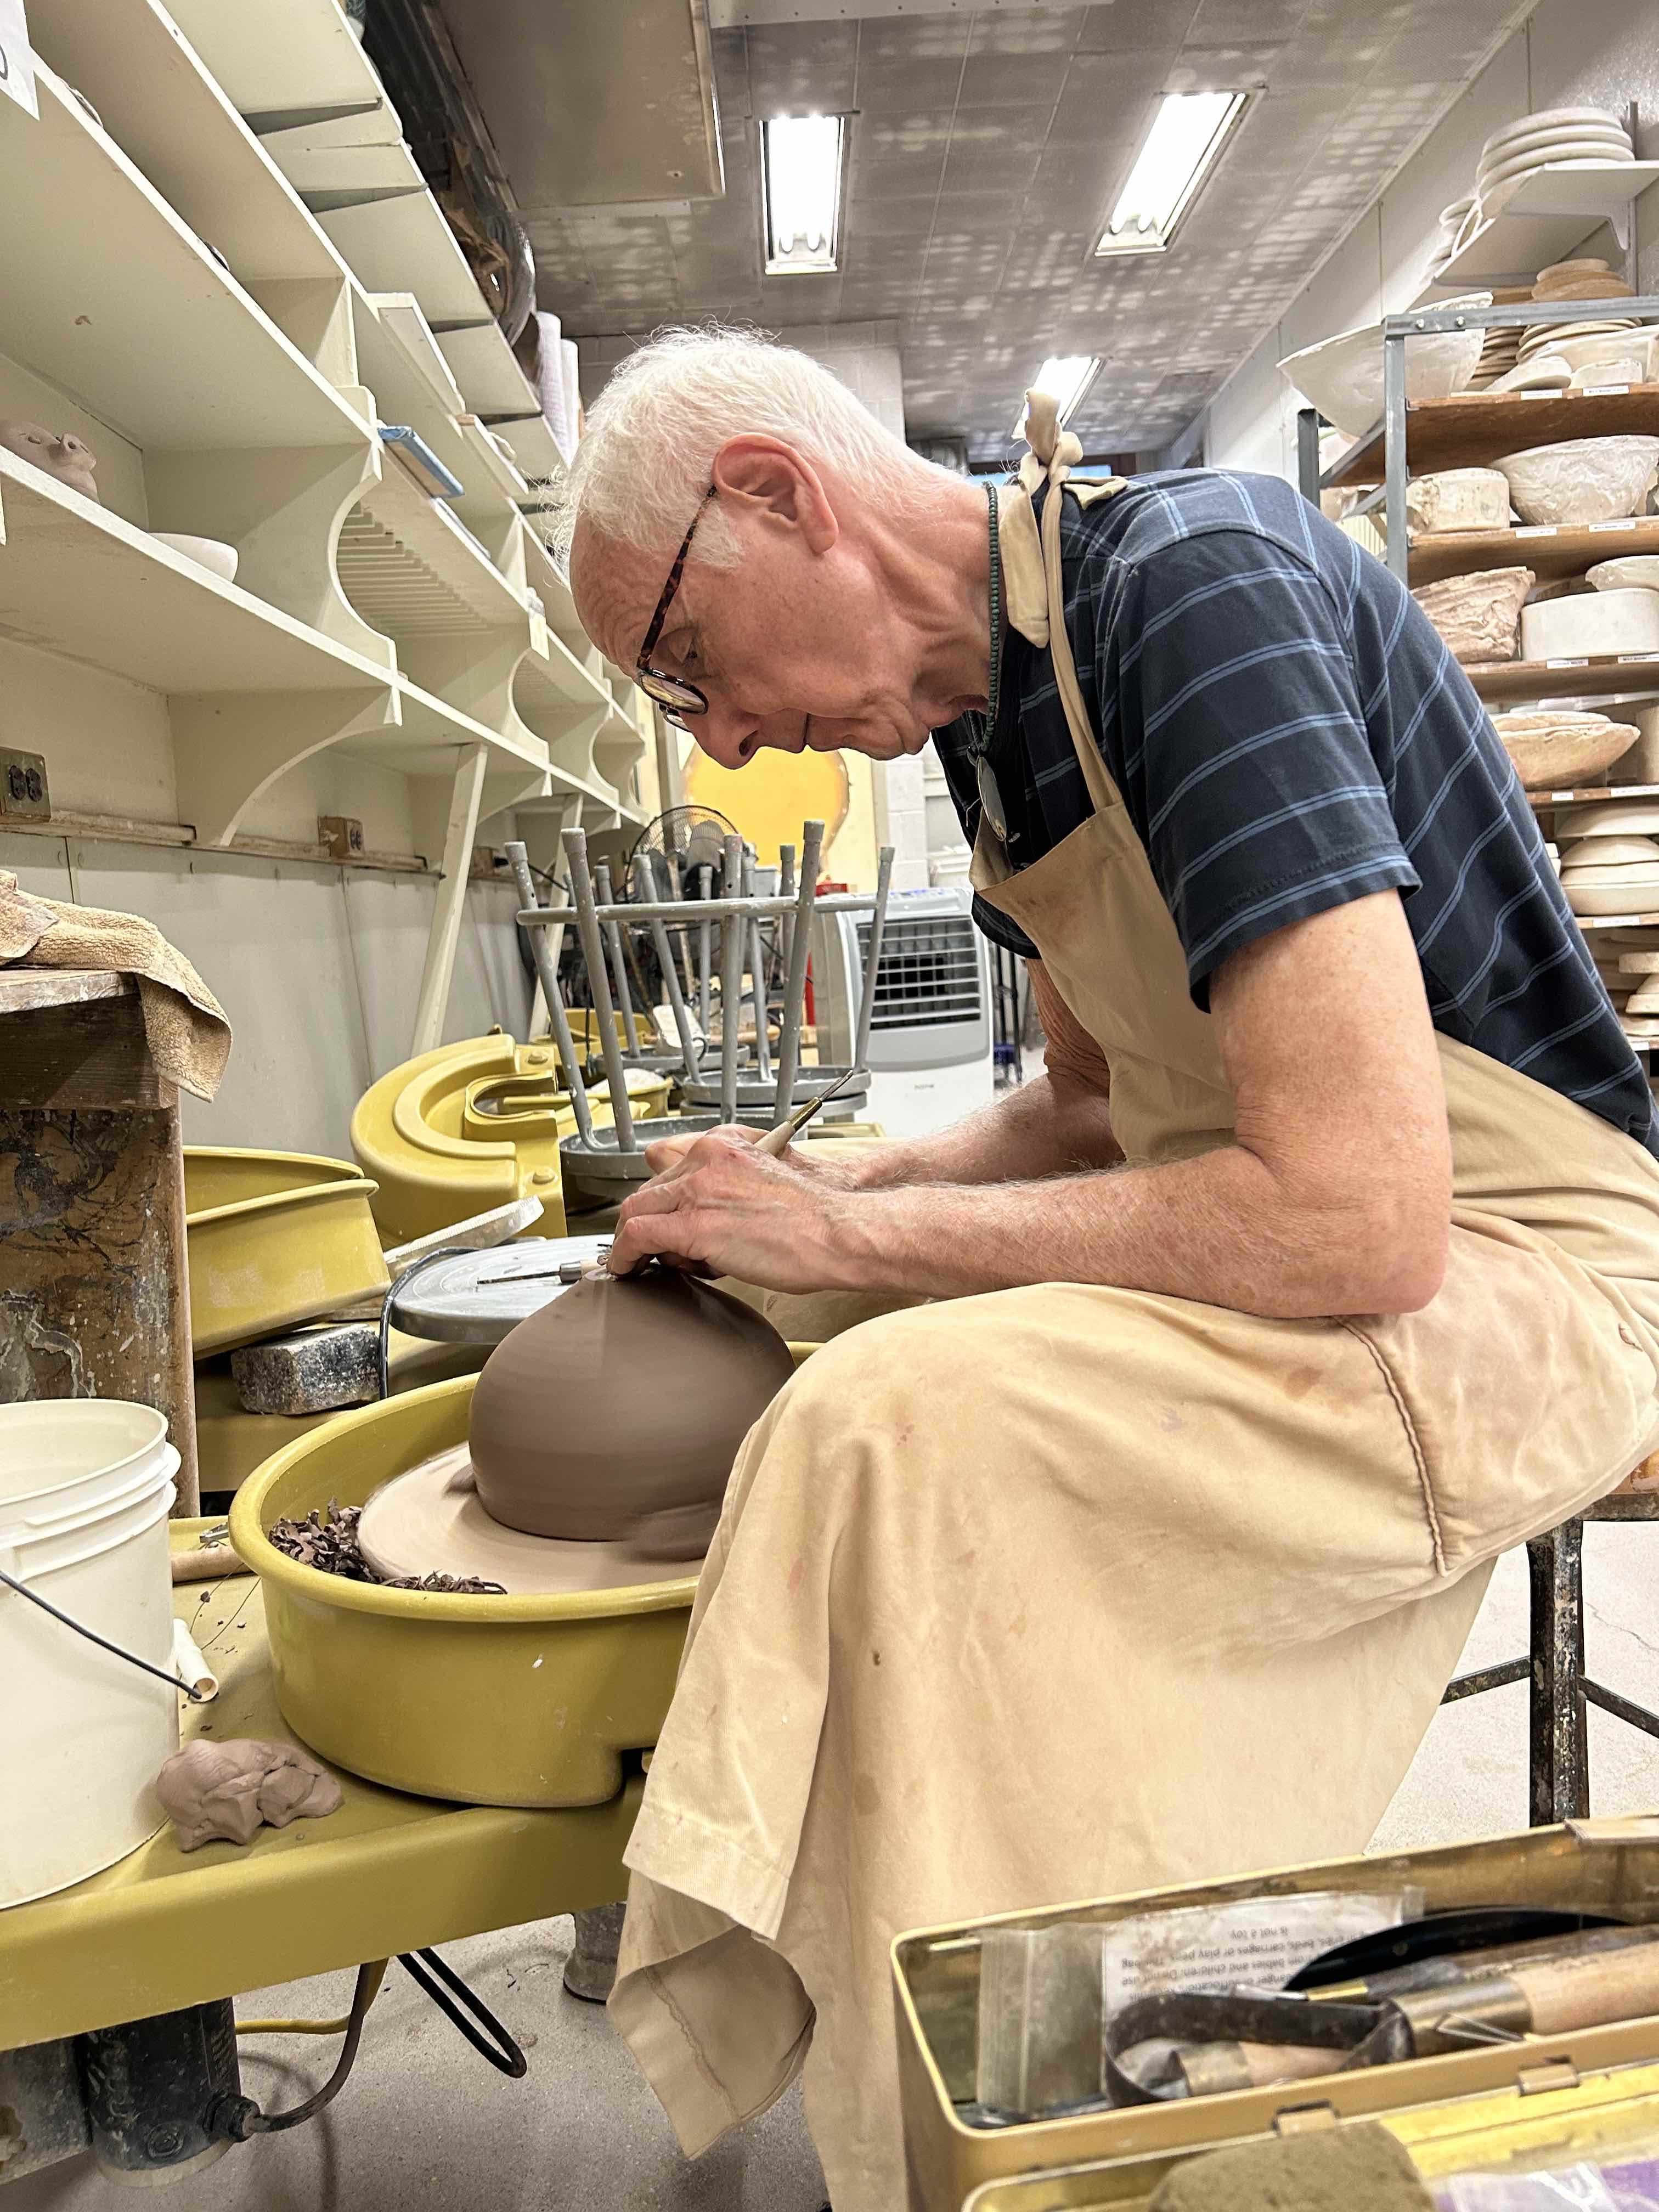 This picture depicts a man creating pottery on a pottery wheel